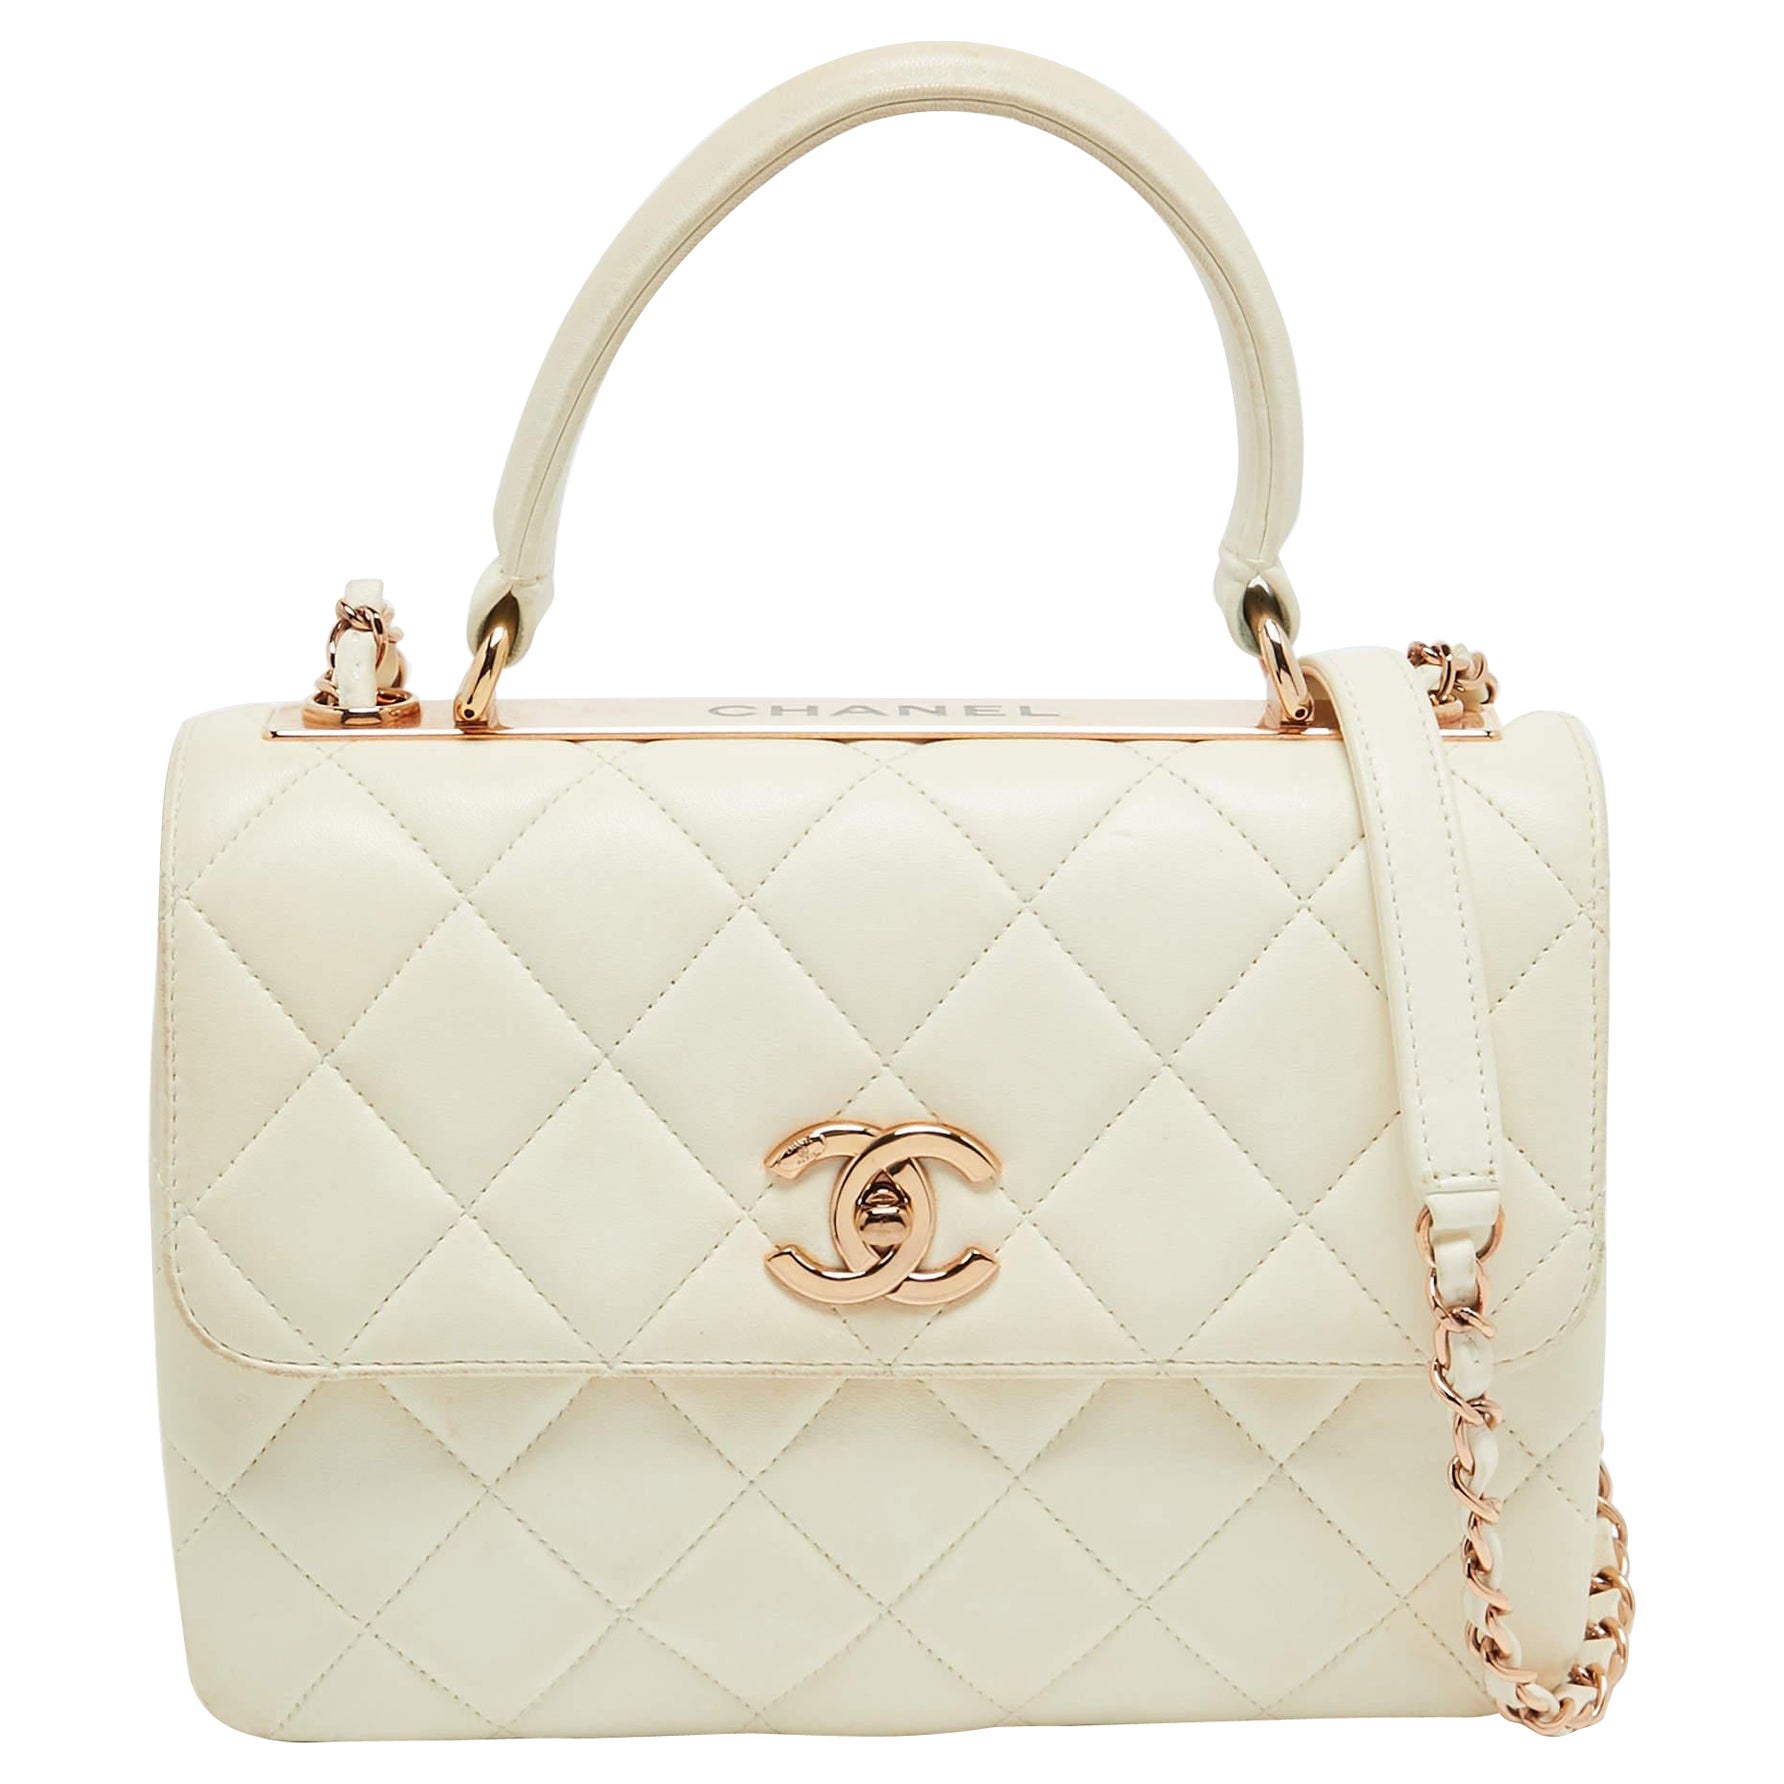  Chanel Off White Quilted Leather Small Trendy CC Flap Bag For Sale